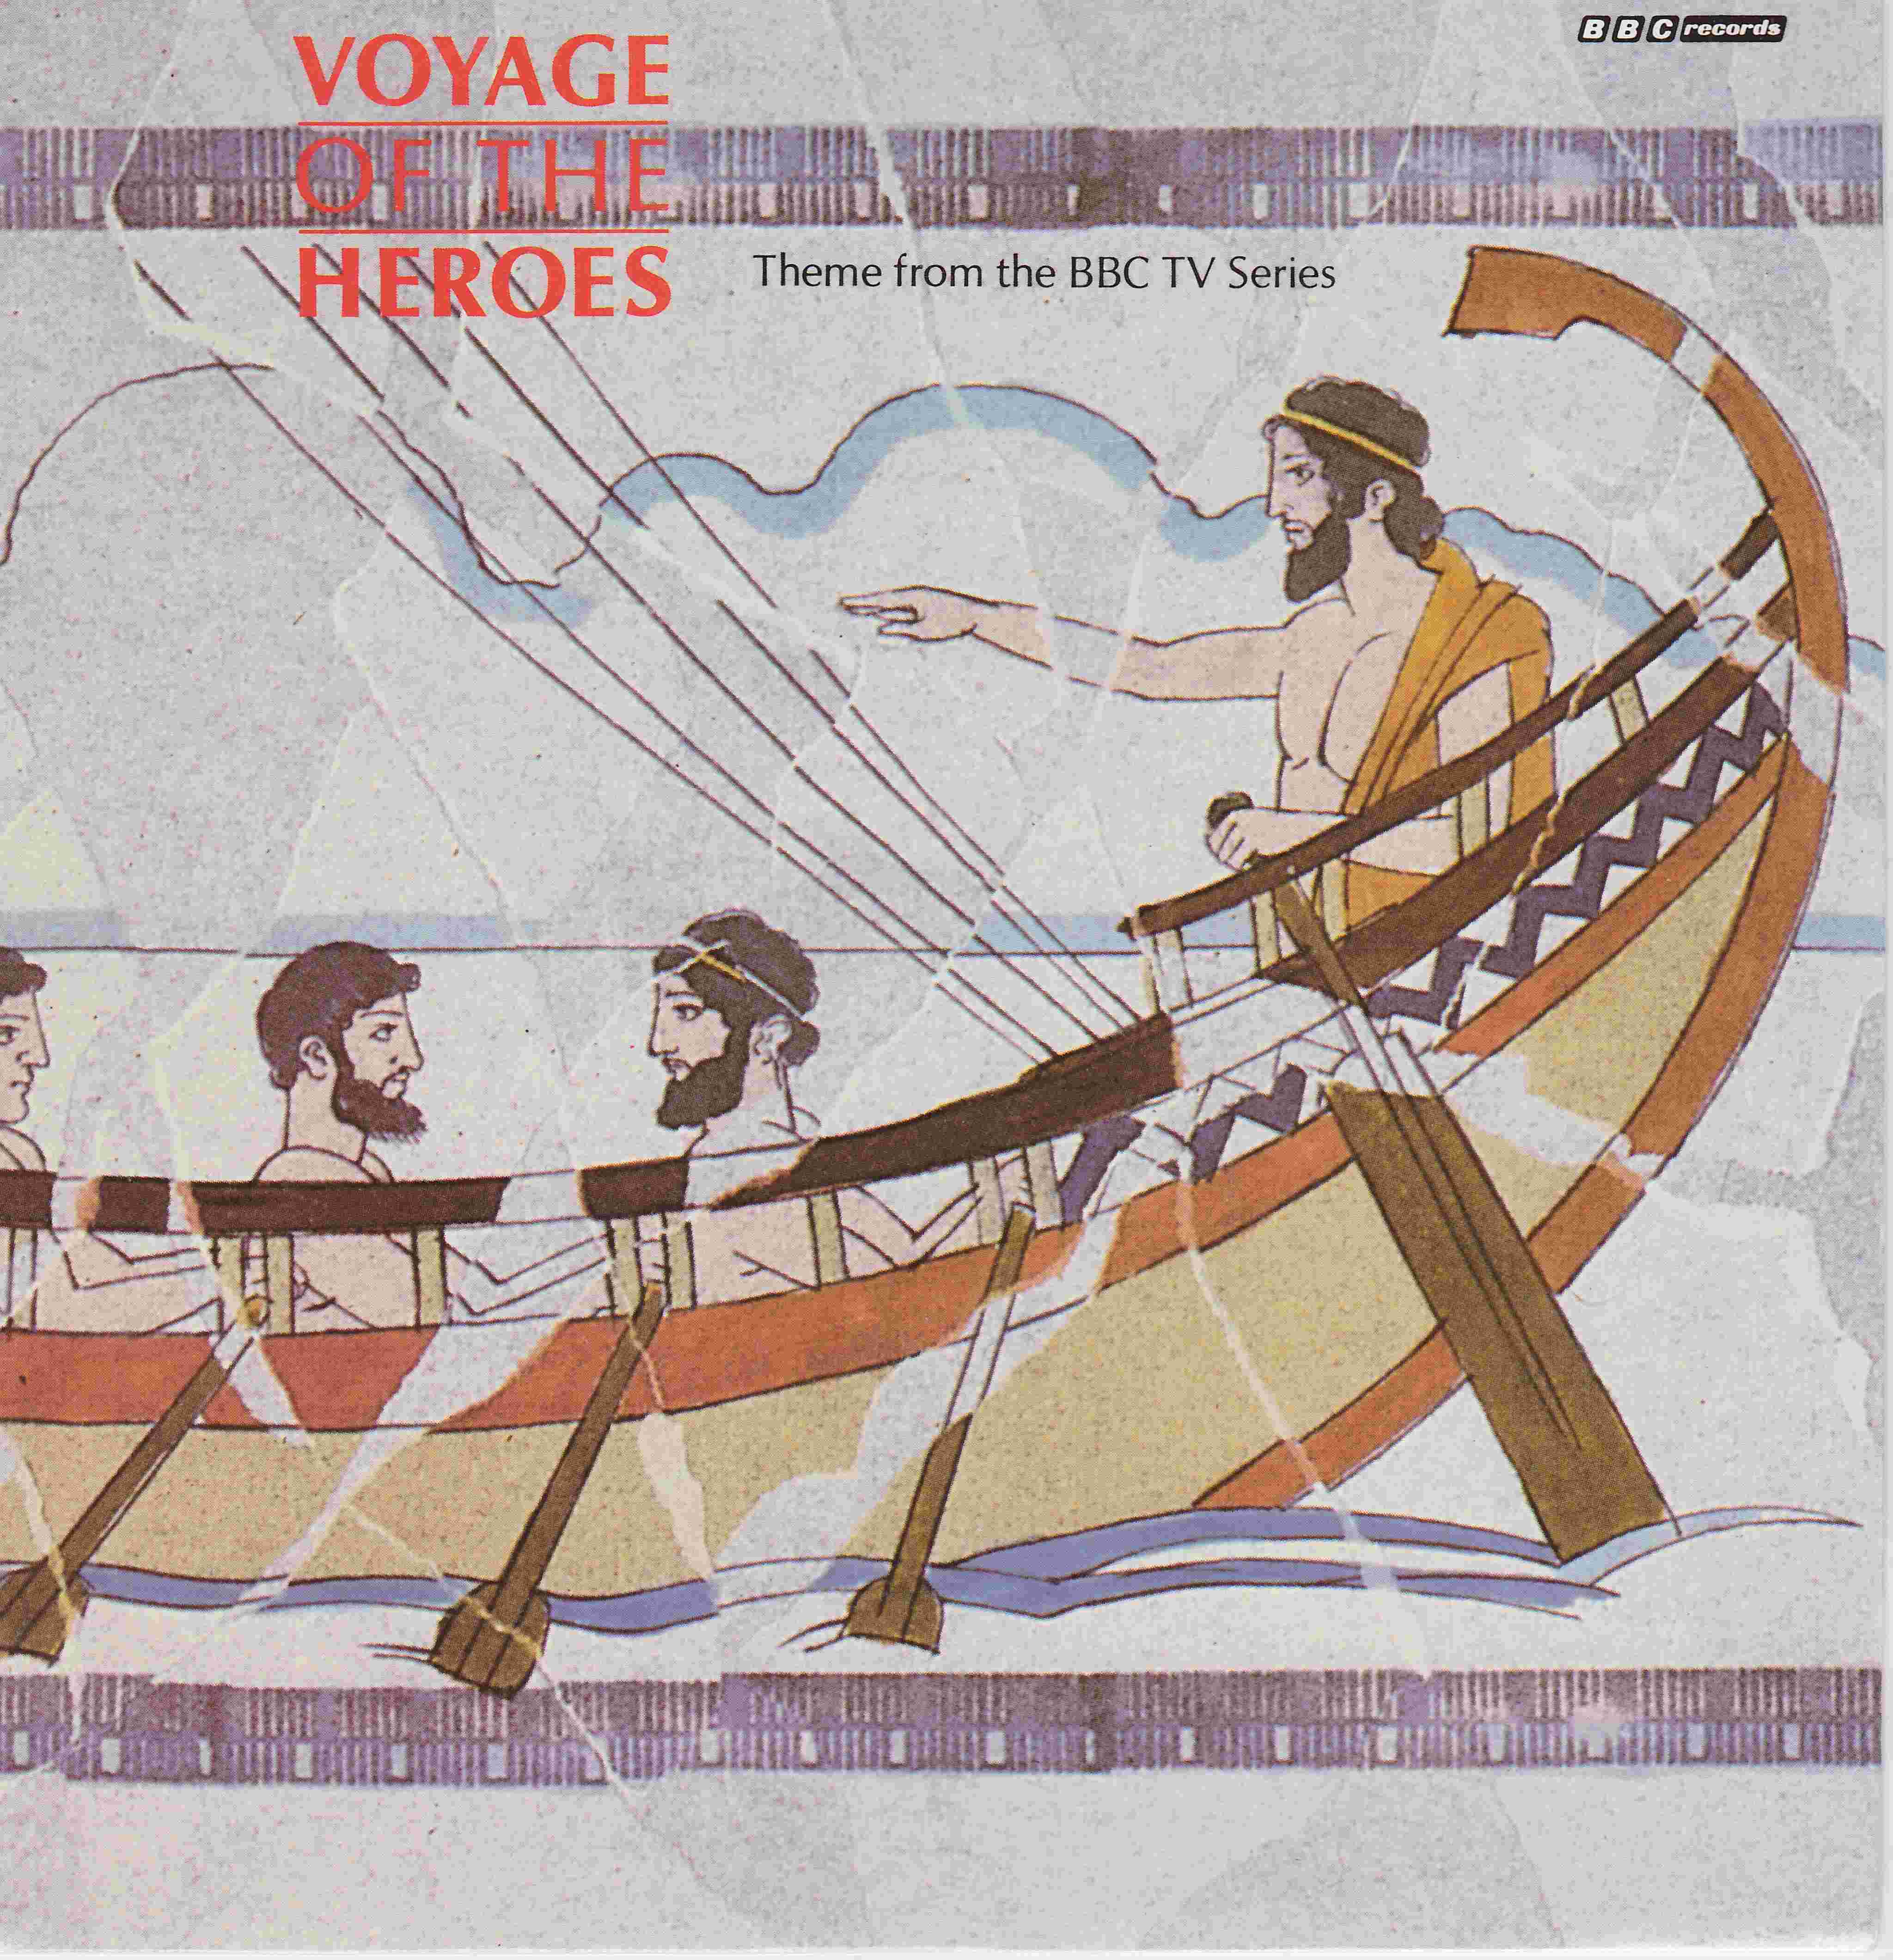 Picture of RESL 169 Voyage of the heroes (Closing theme) by artist Howard Davidson from the BBC singles - Records and Tapes library